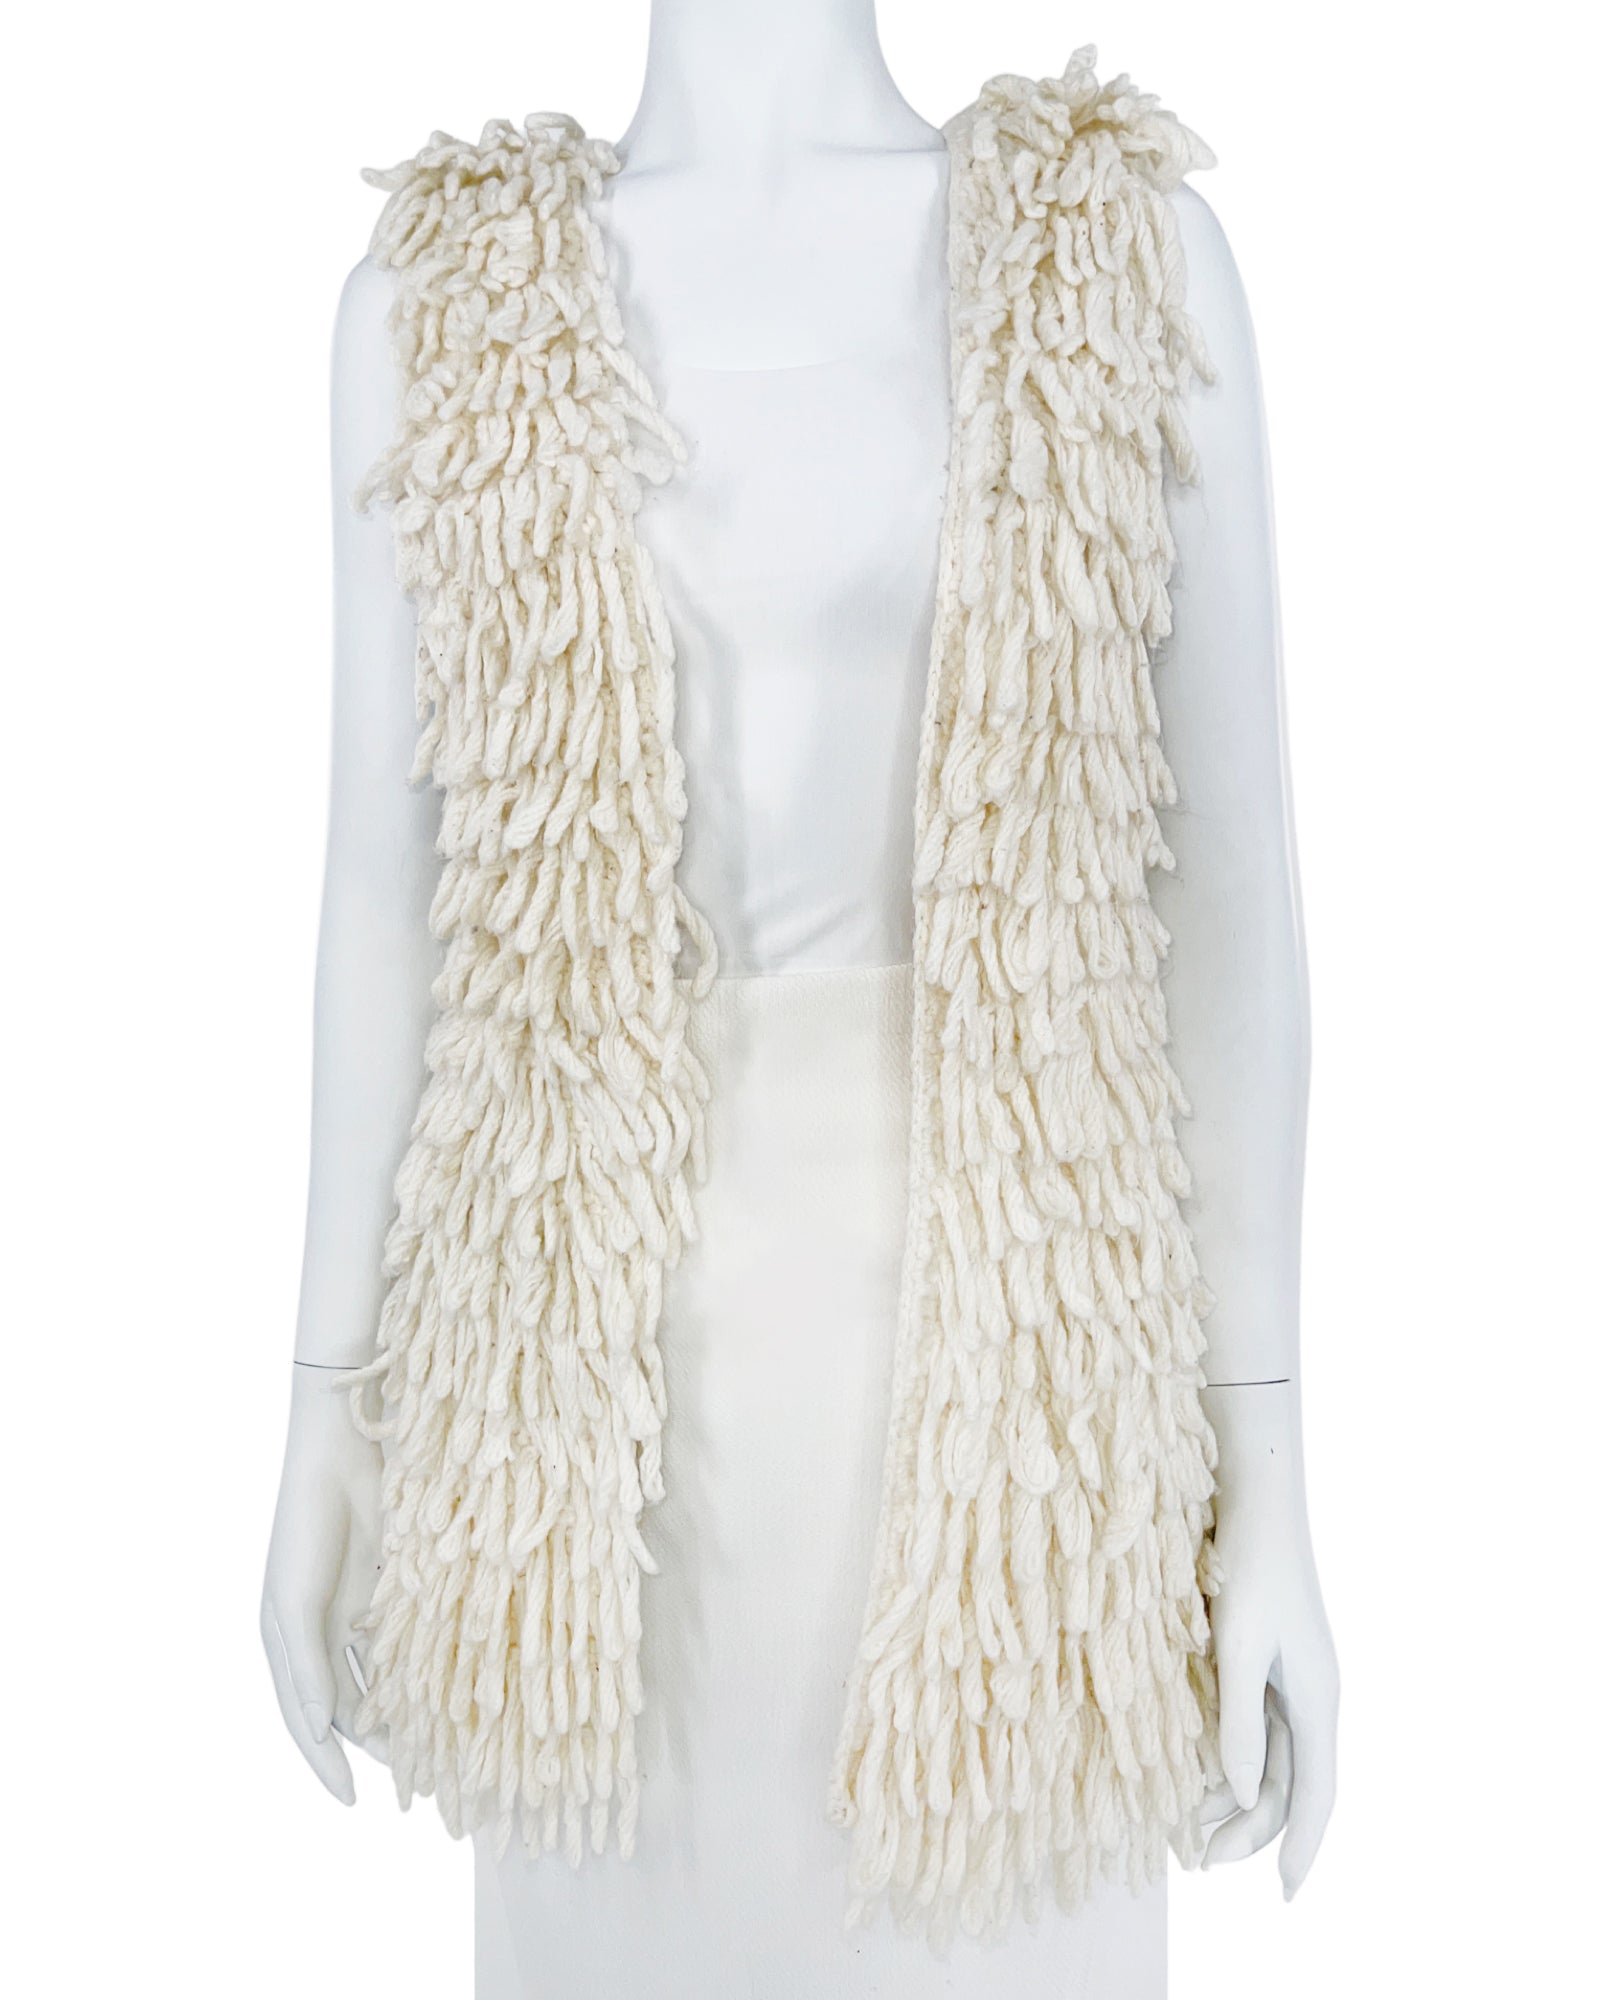 AS by DF white sweater vest,